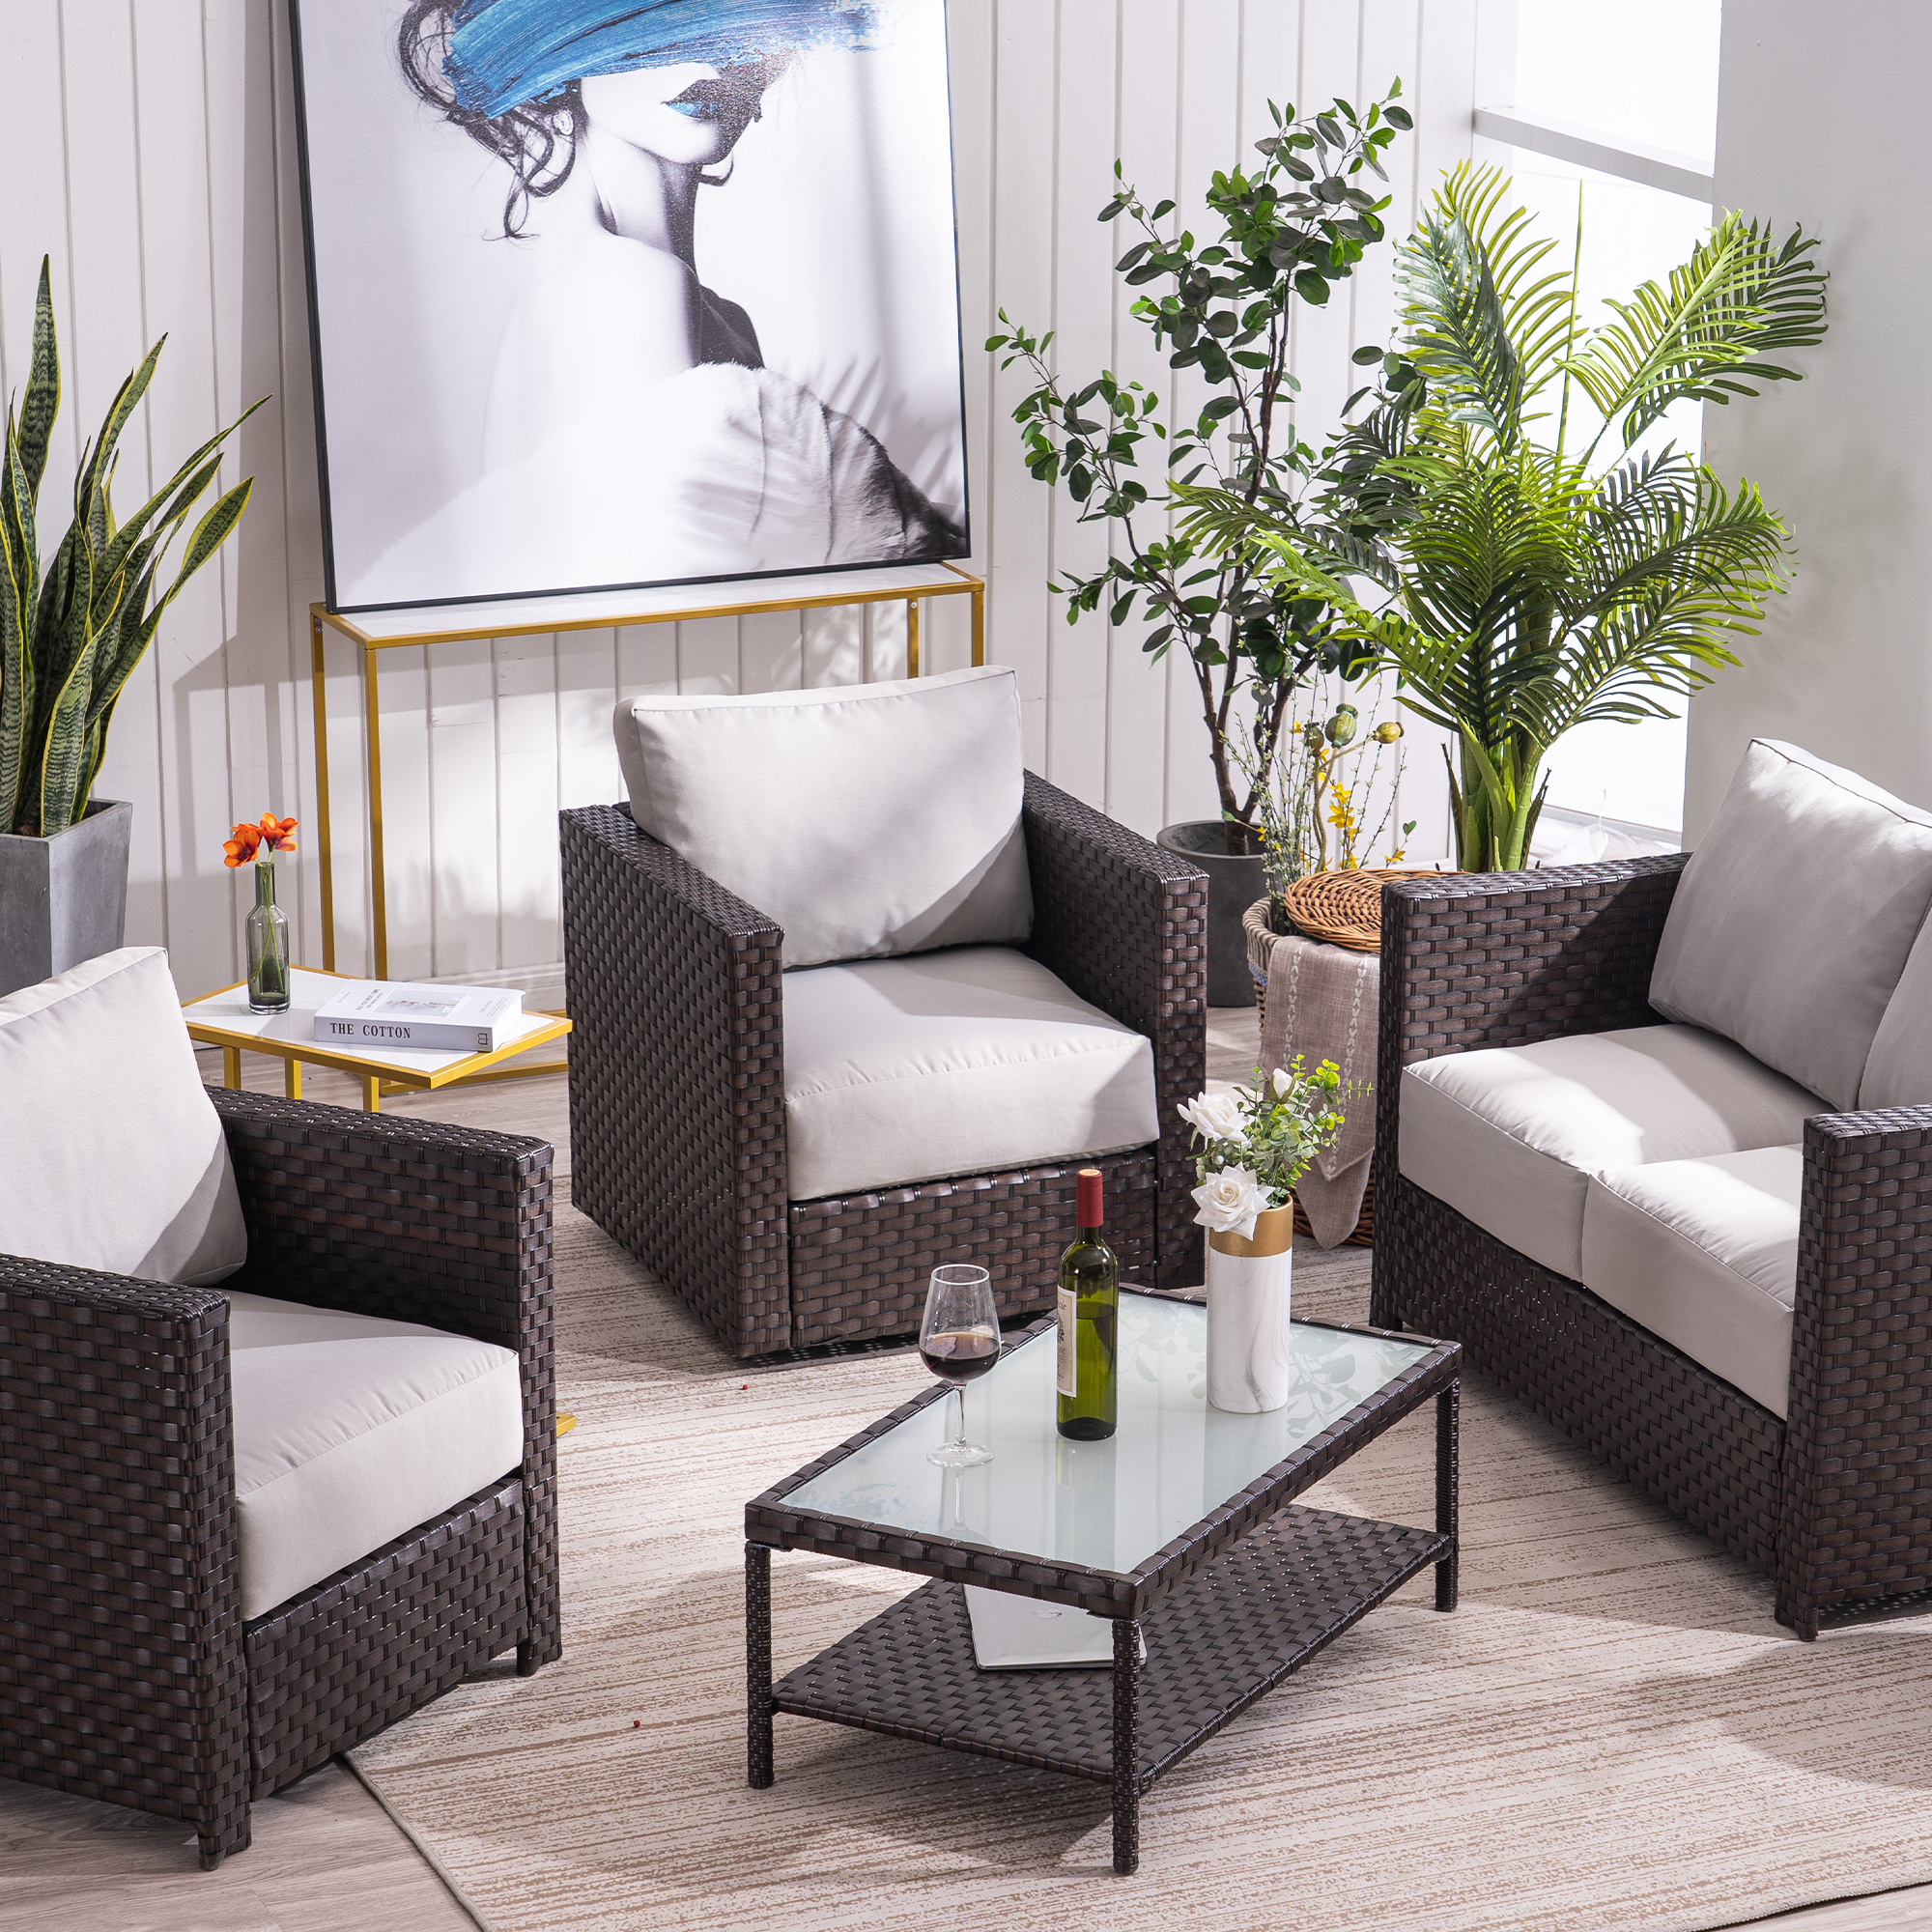 Mcombo Wicker Patio Sofa Furniture with Swivel Lounge Chair and Cushion , Coffee Table with Tempered Frosted Glass,4 Pieces Wicker Conversation Set ,Outdoor Loveseat 6082-9575EY (Grey) - image 4 of 8